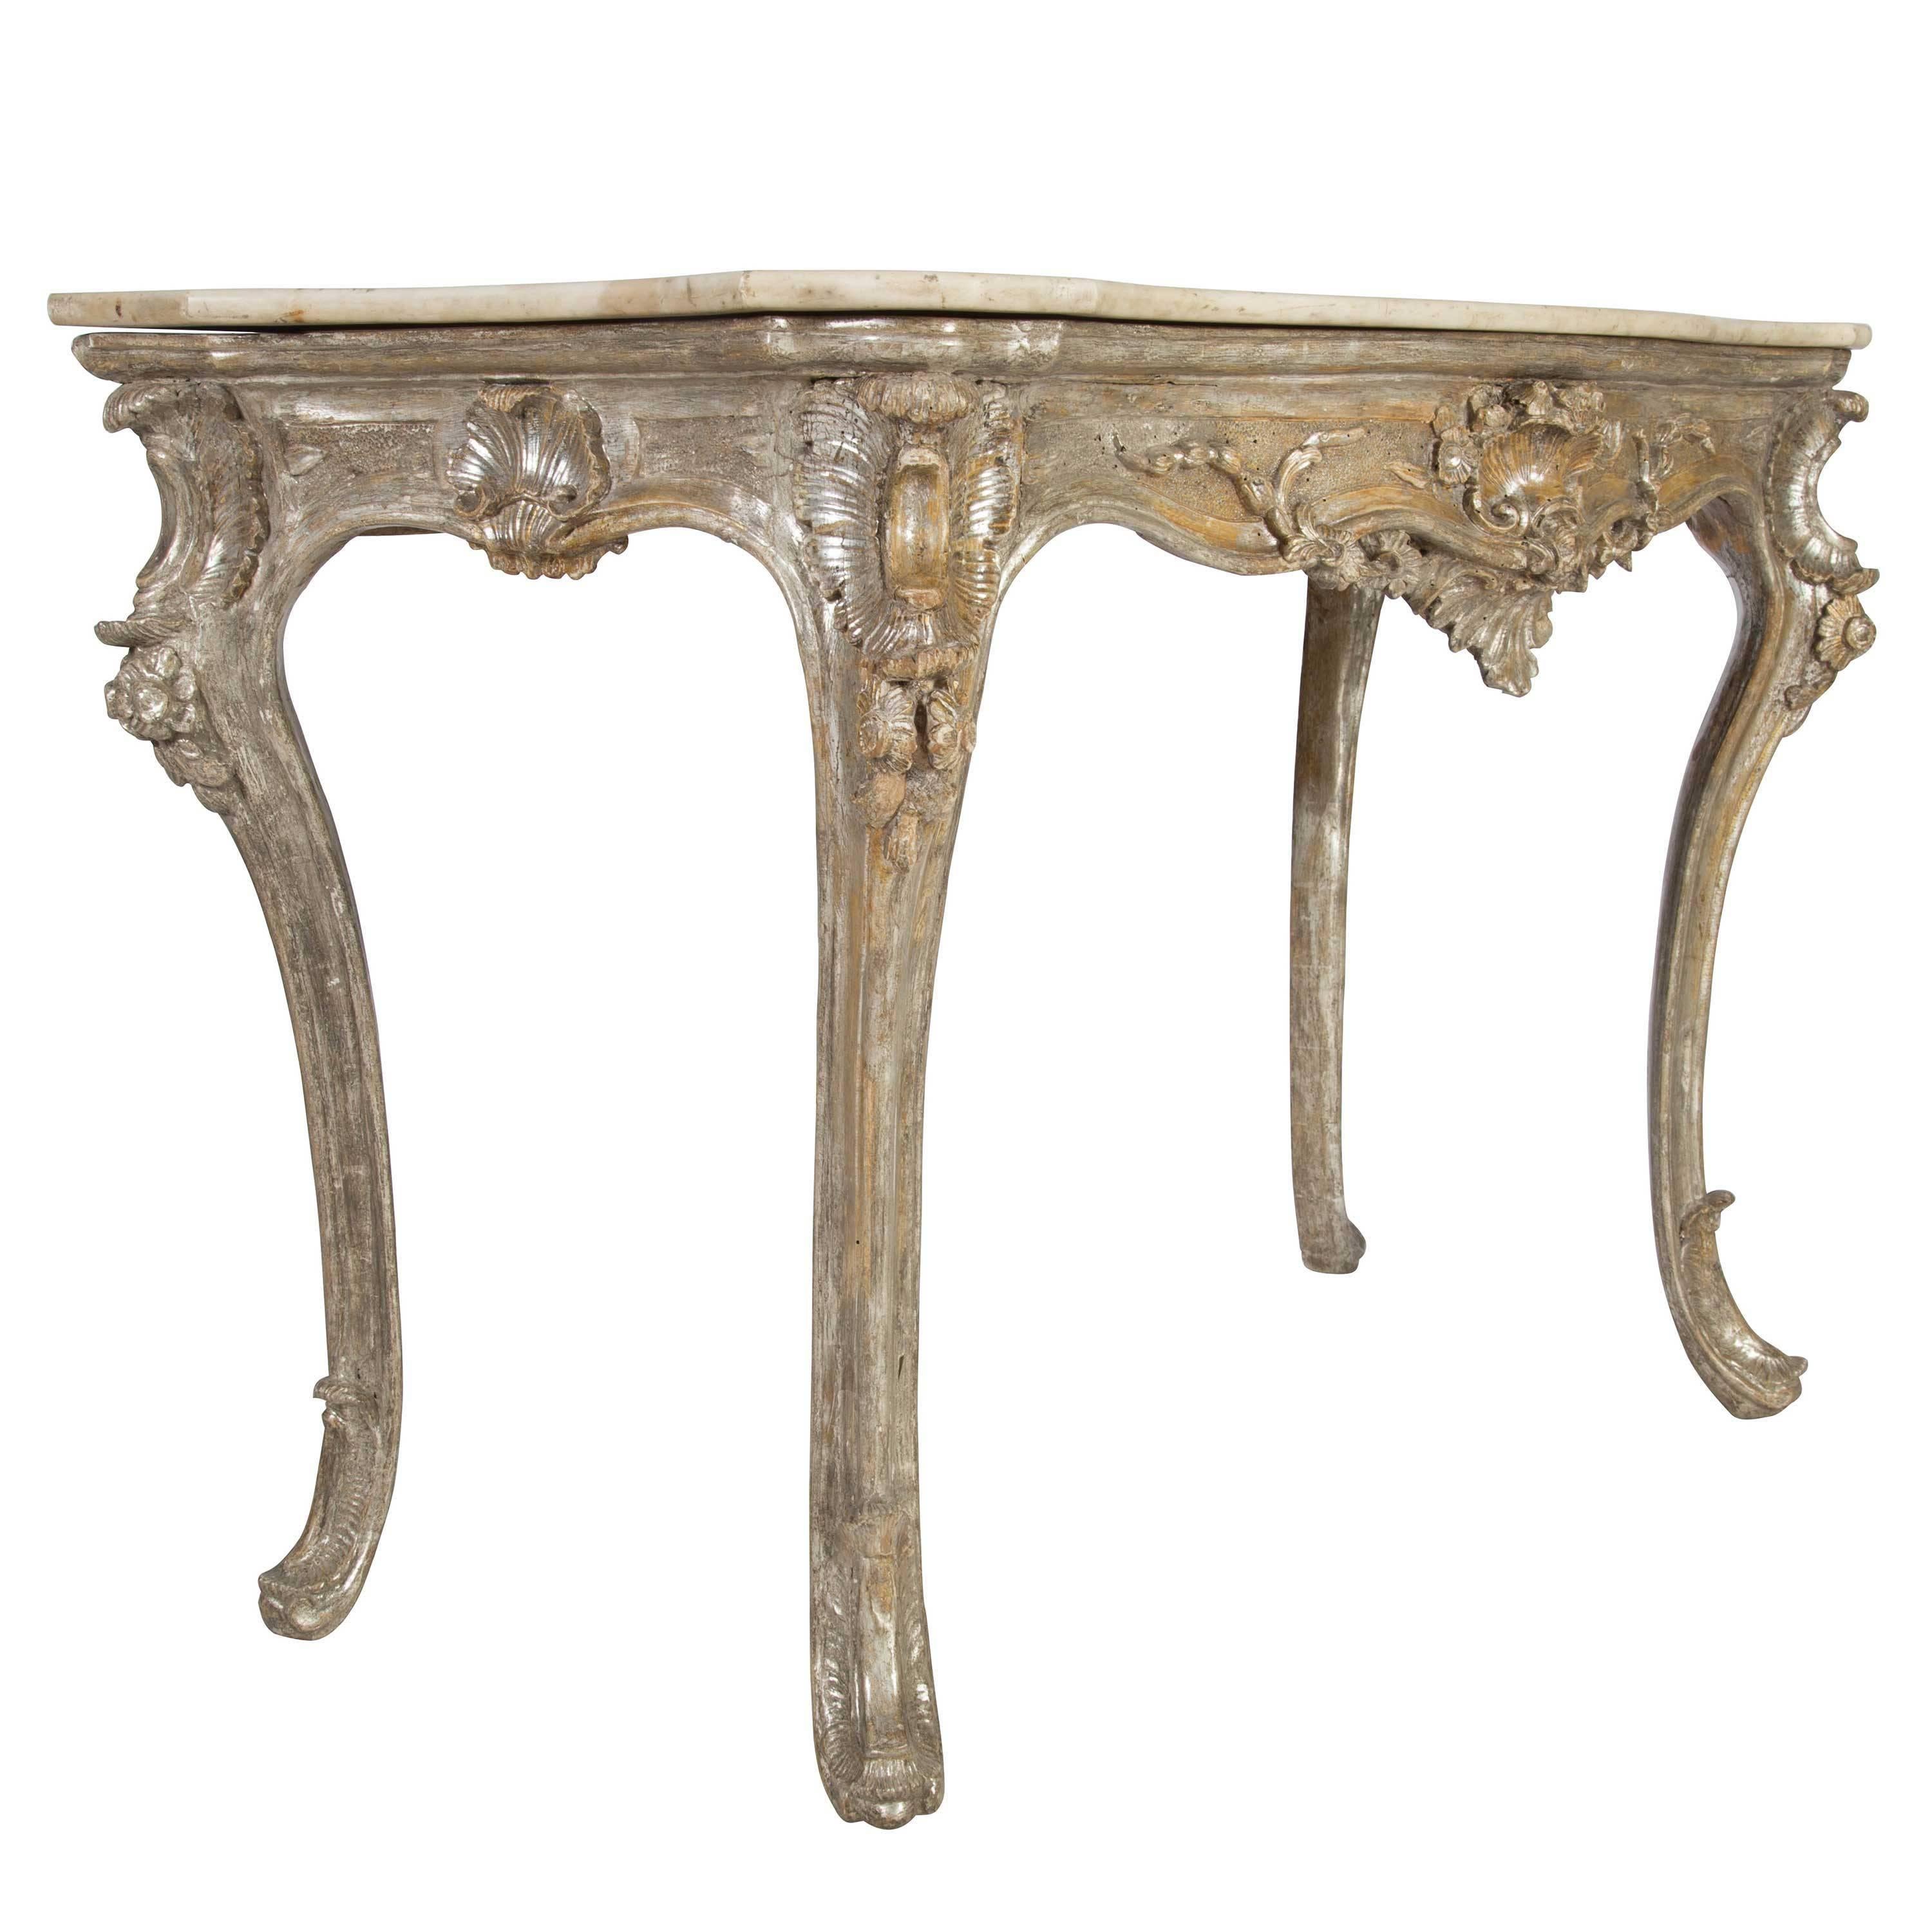 An 18th century Italian Rococo period console table in refreshed original silver gilt and with original marble top.